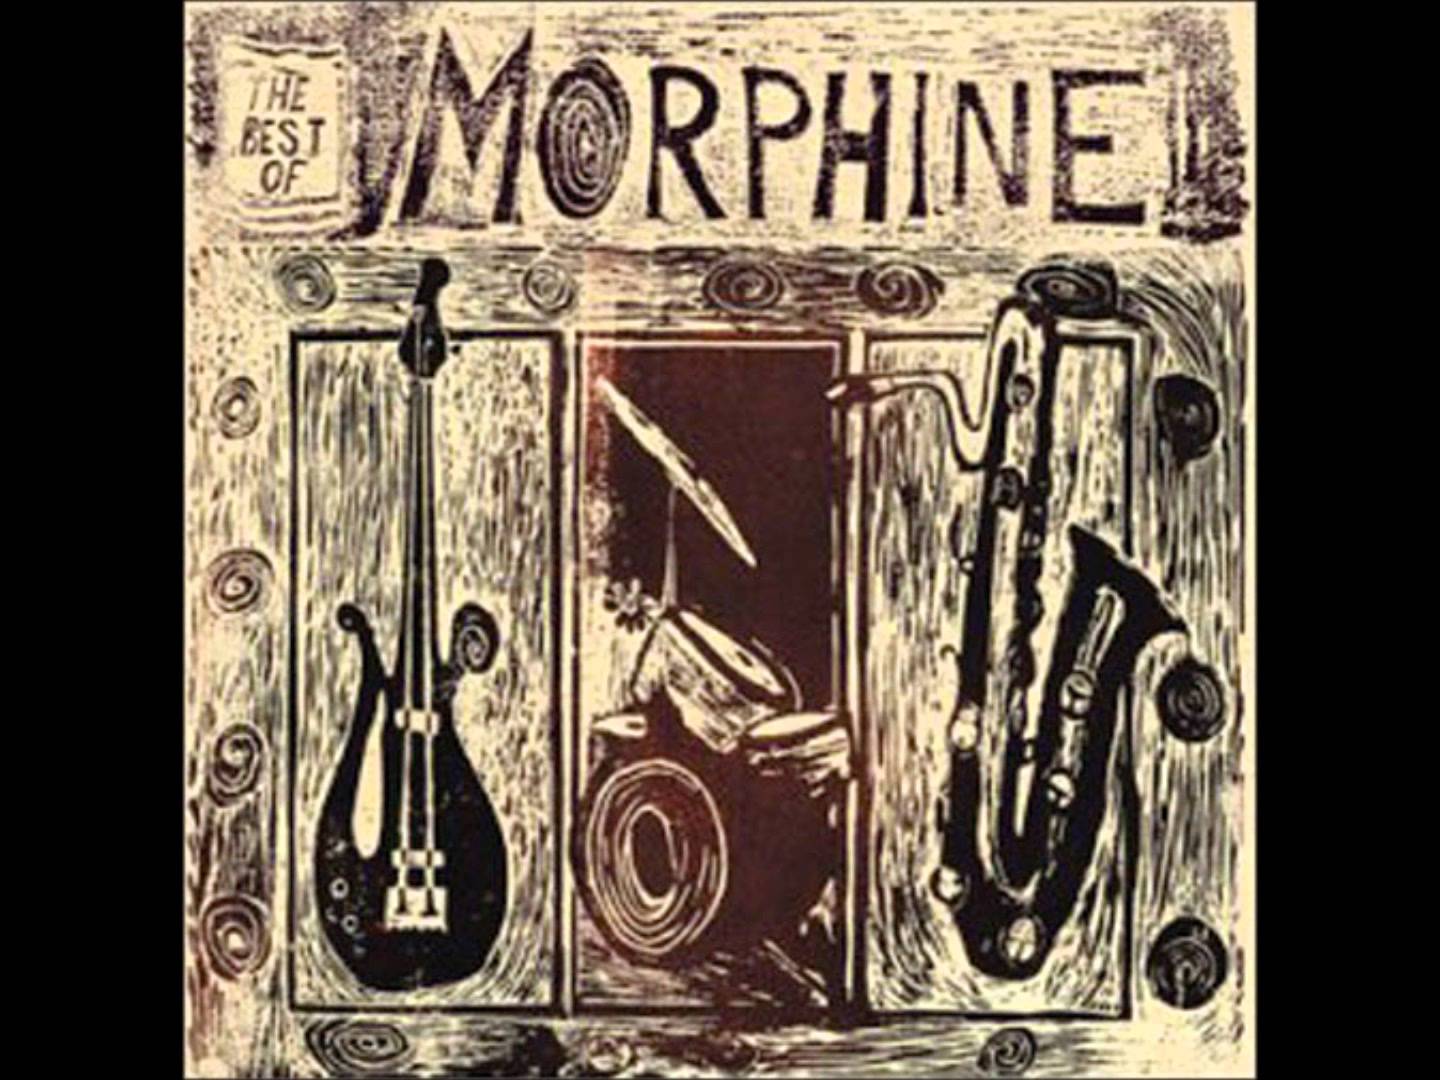 Morphine - Take Me With You